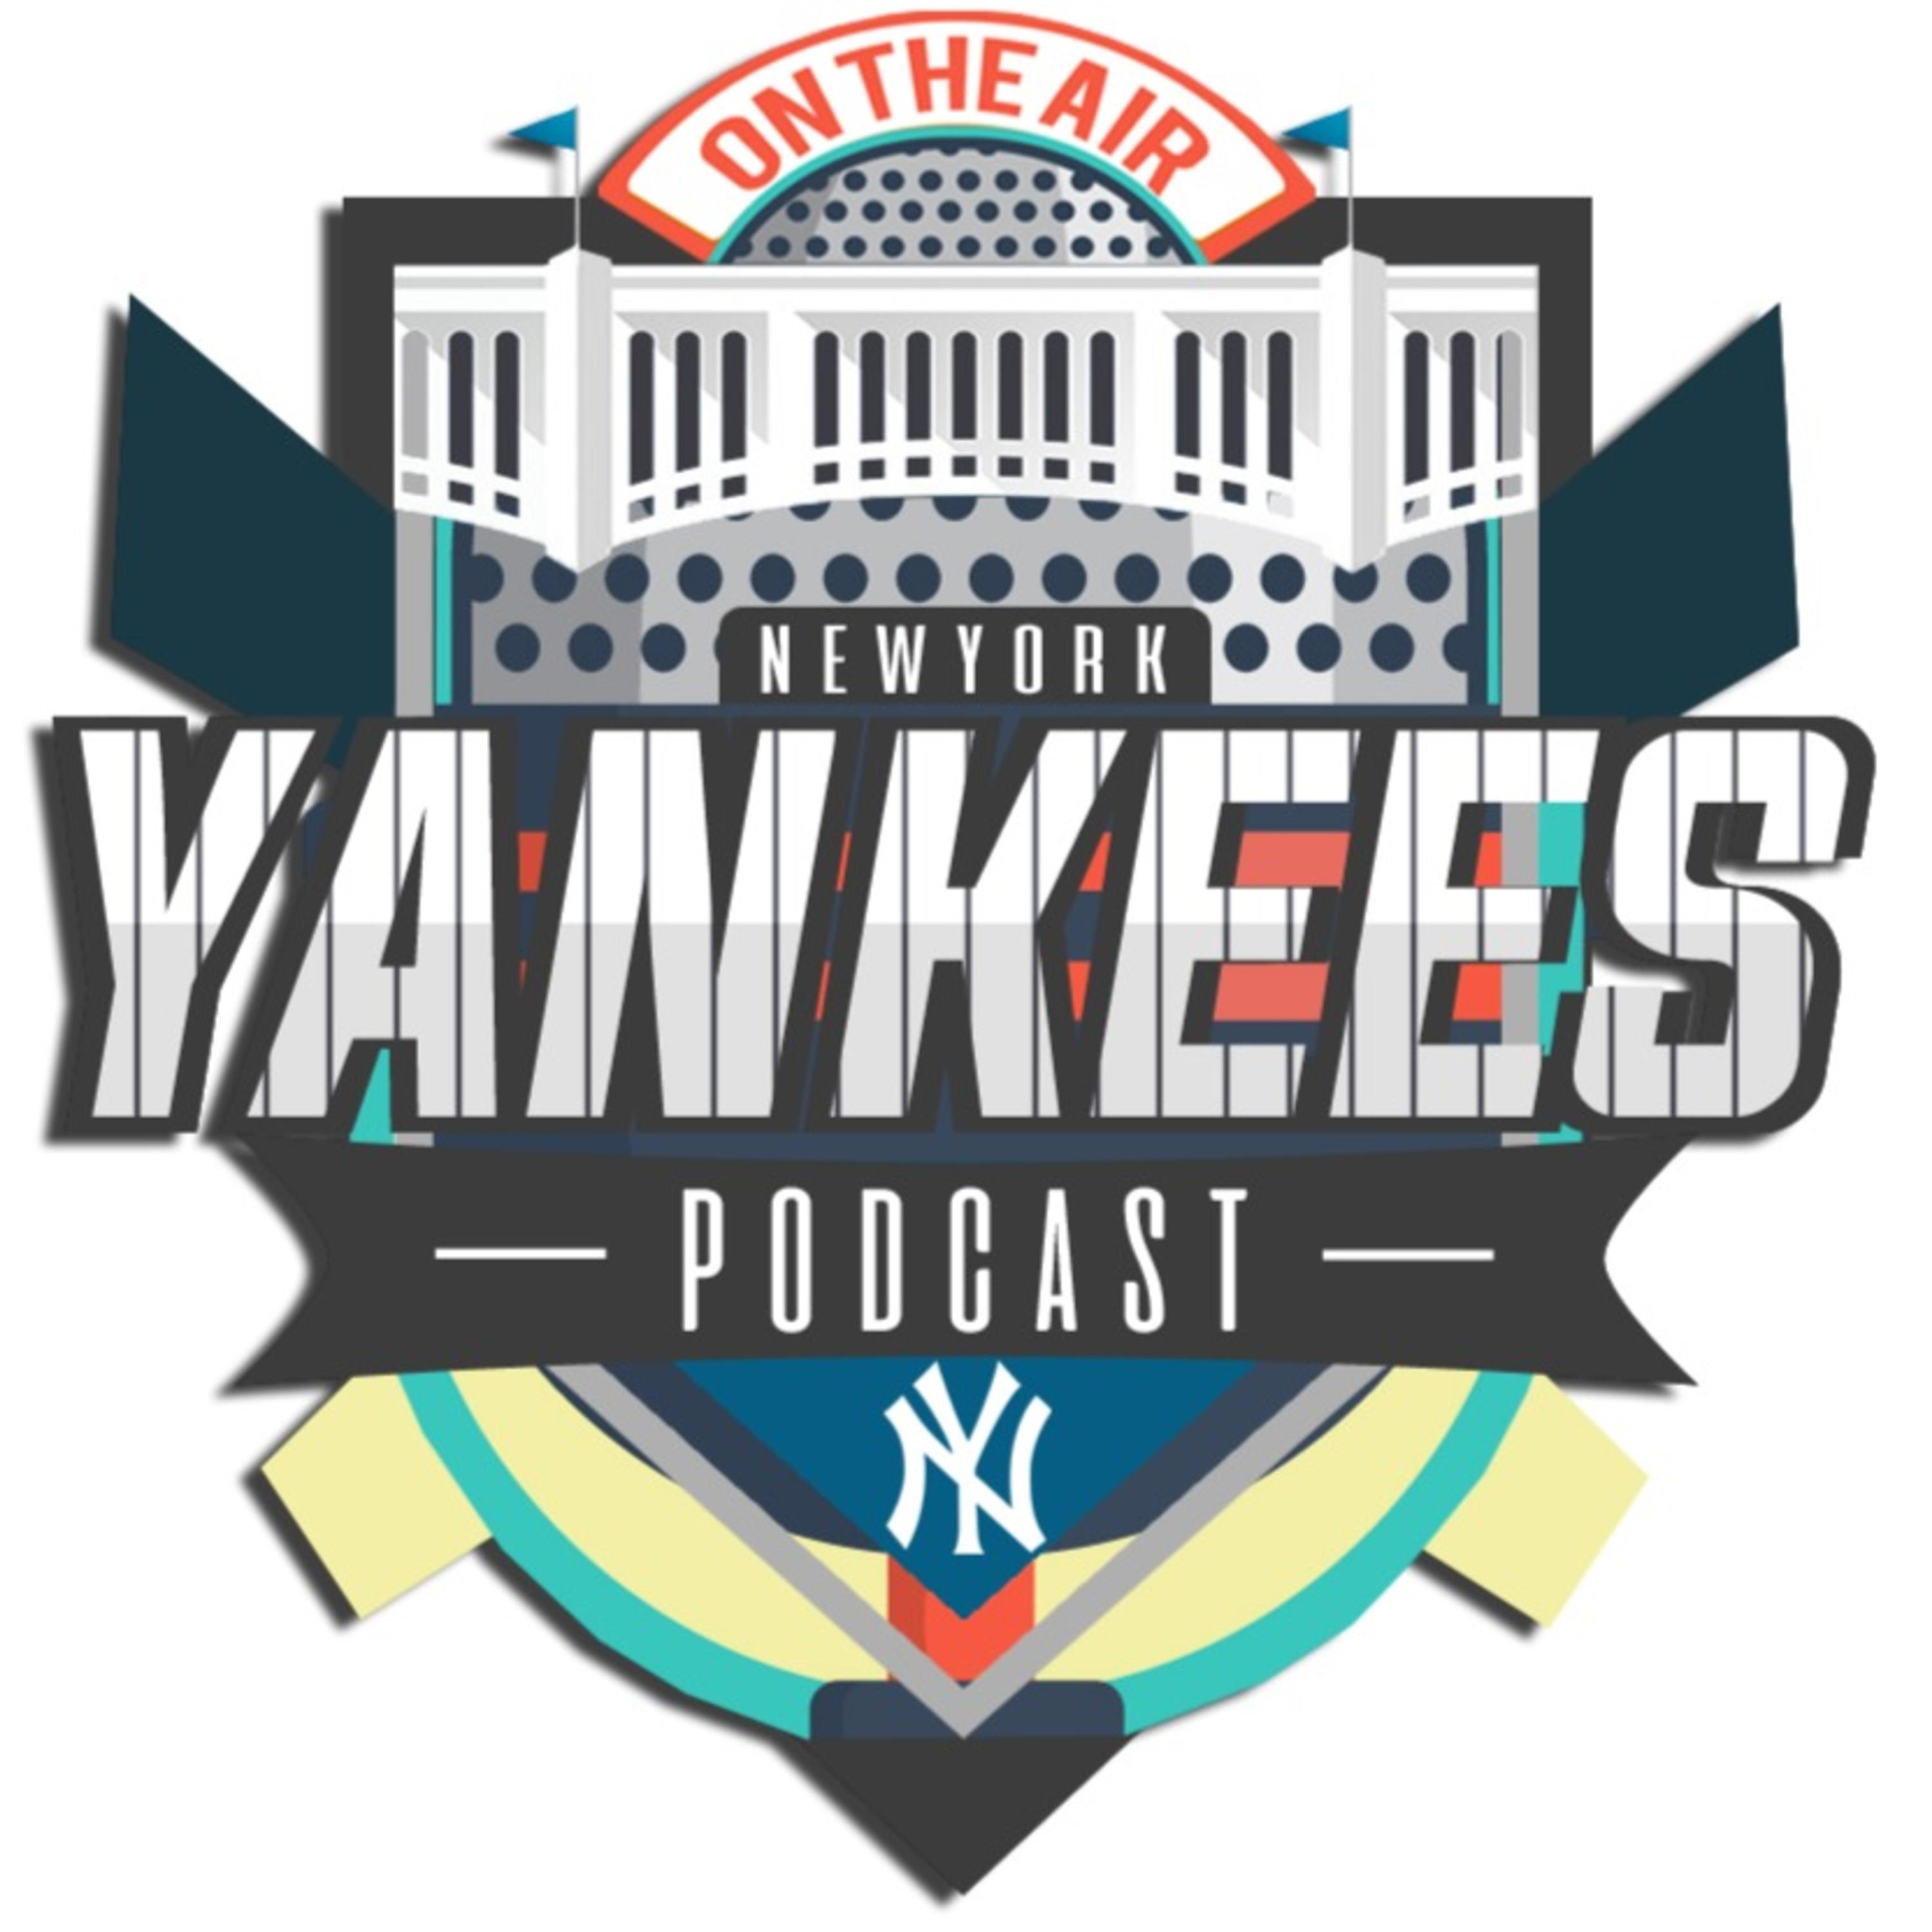 New York Yankees Hungary Podcast - Bé x DS! x Mike - S05EP14